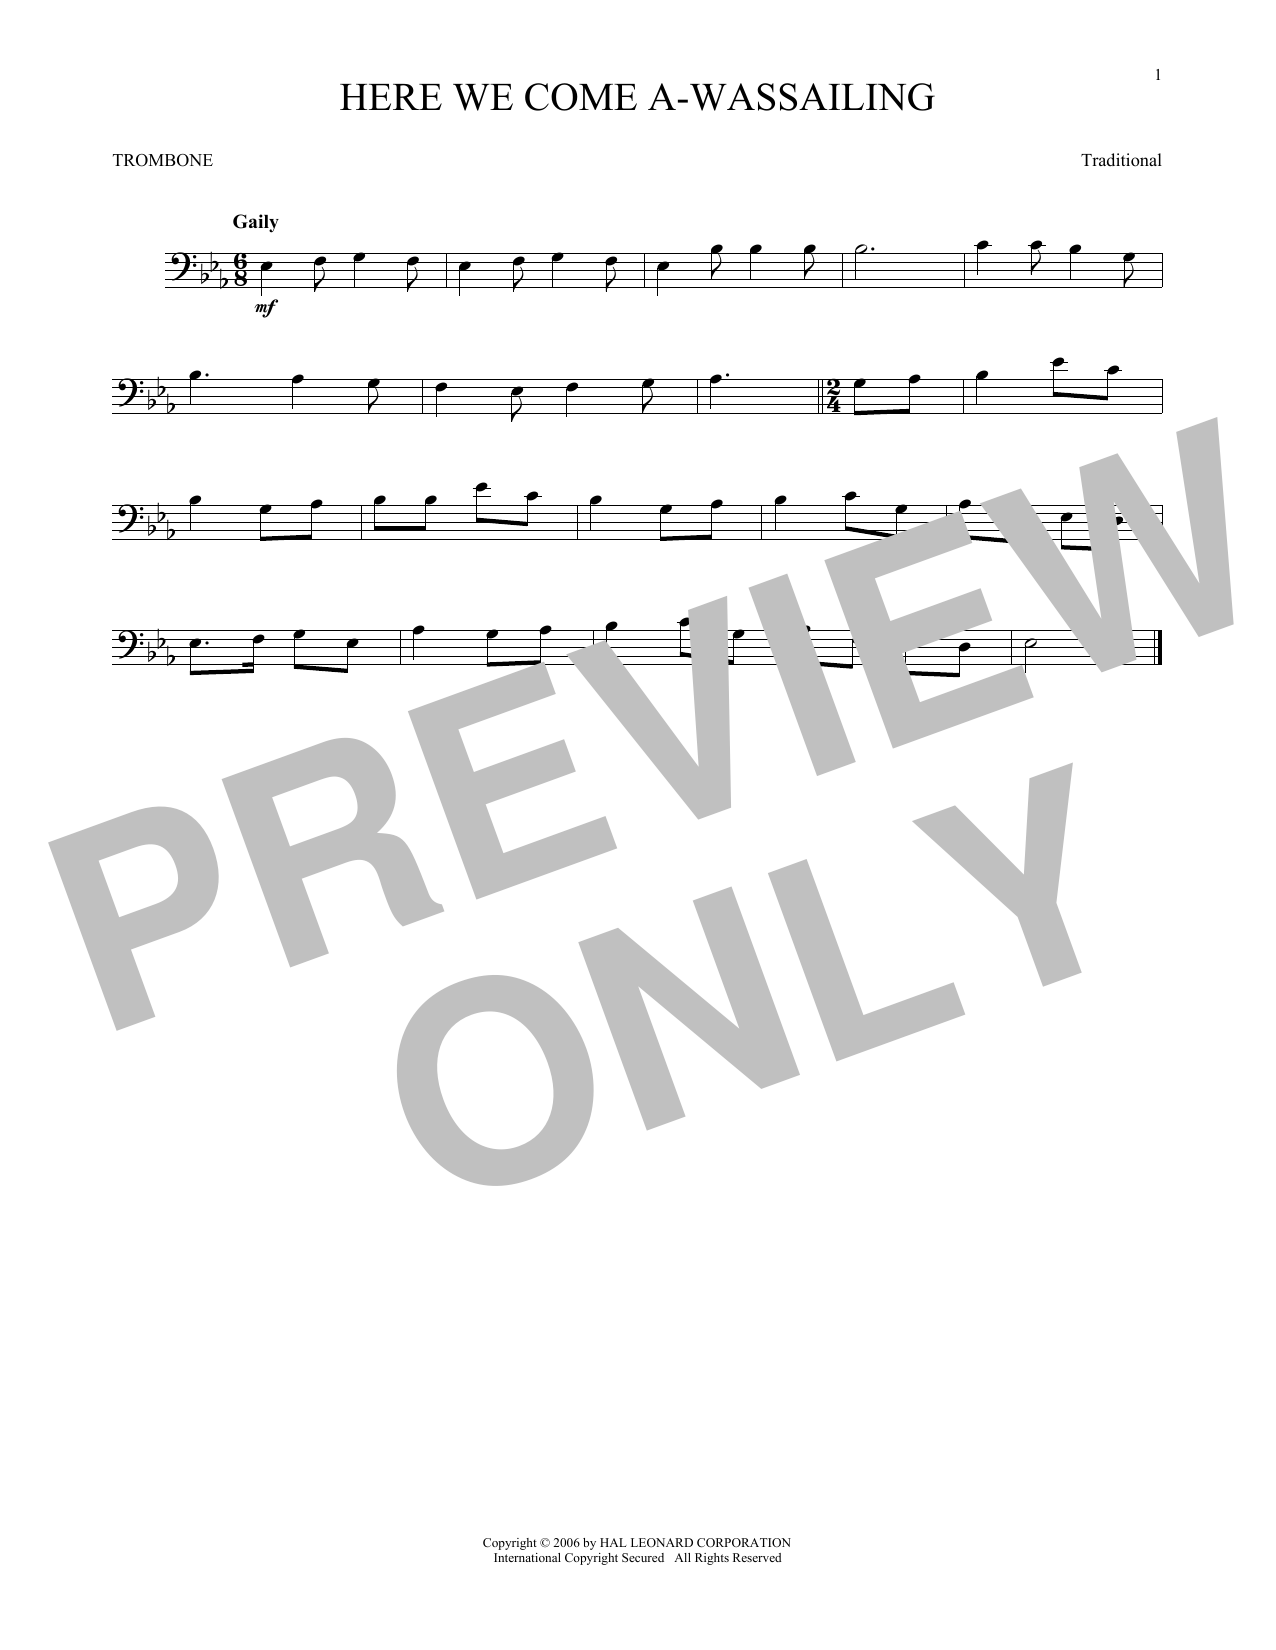 Download Traditional Here We Come A-Wassailing Sheet Music